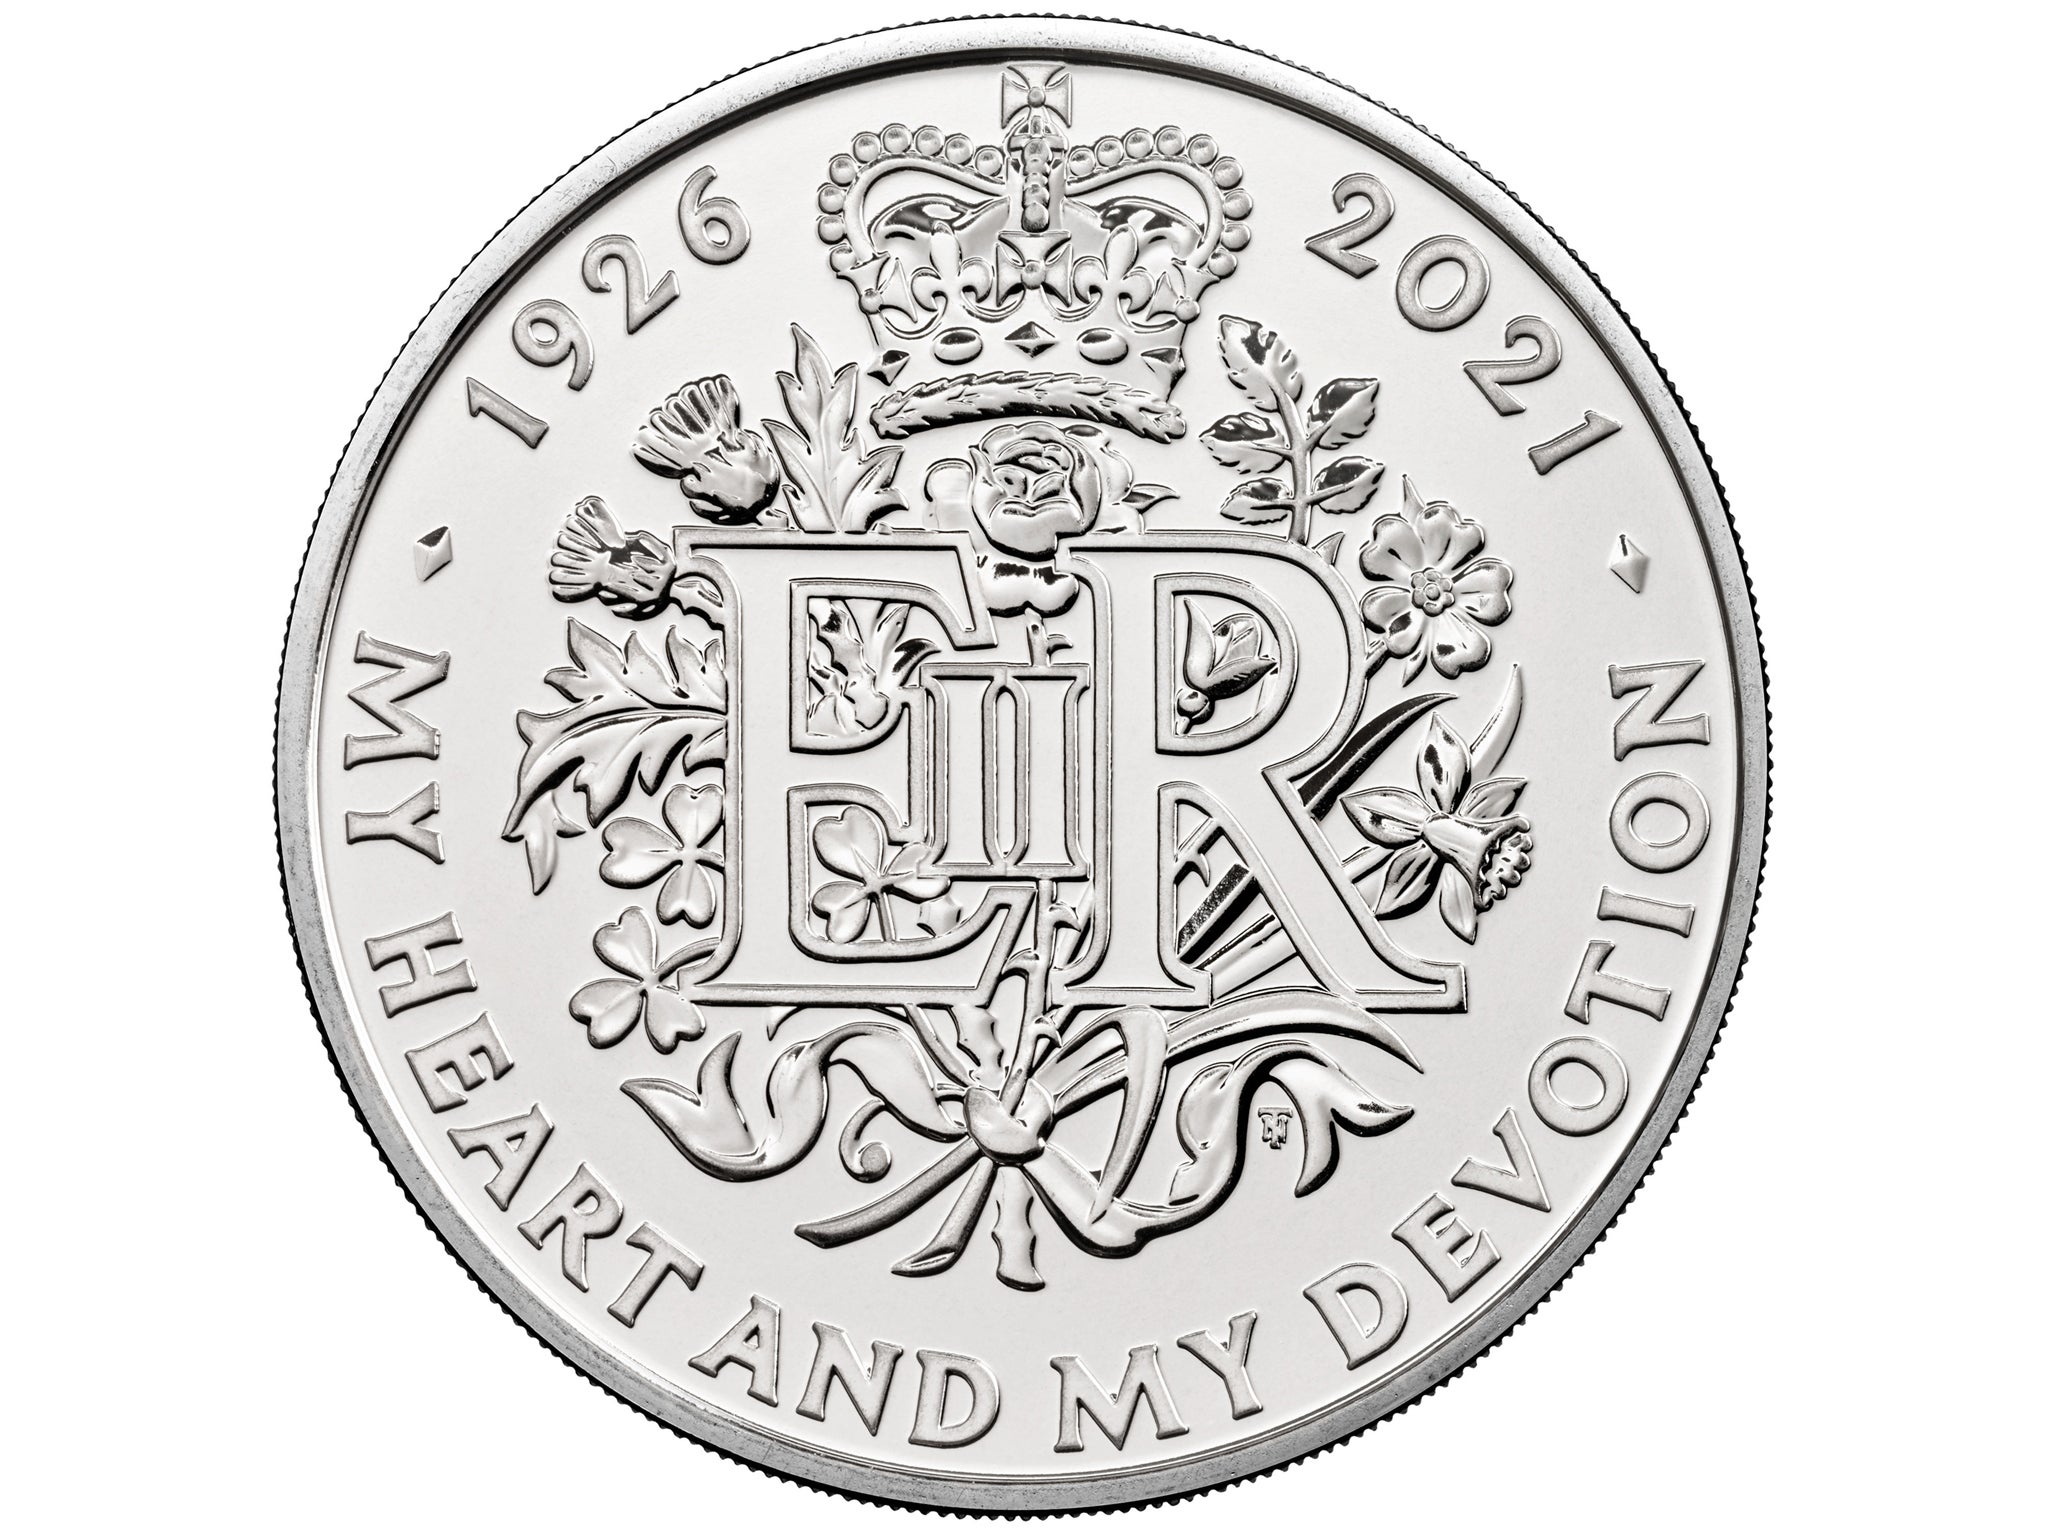 The new £5 coin to commemorate the Queen’s 95th birthday